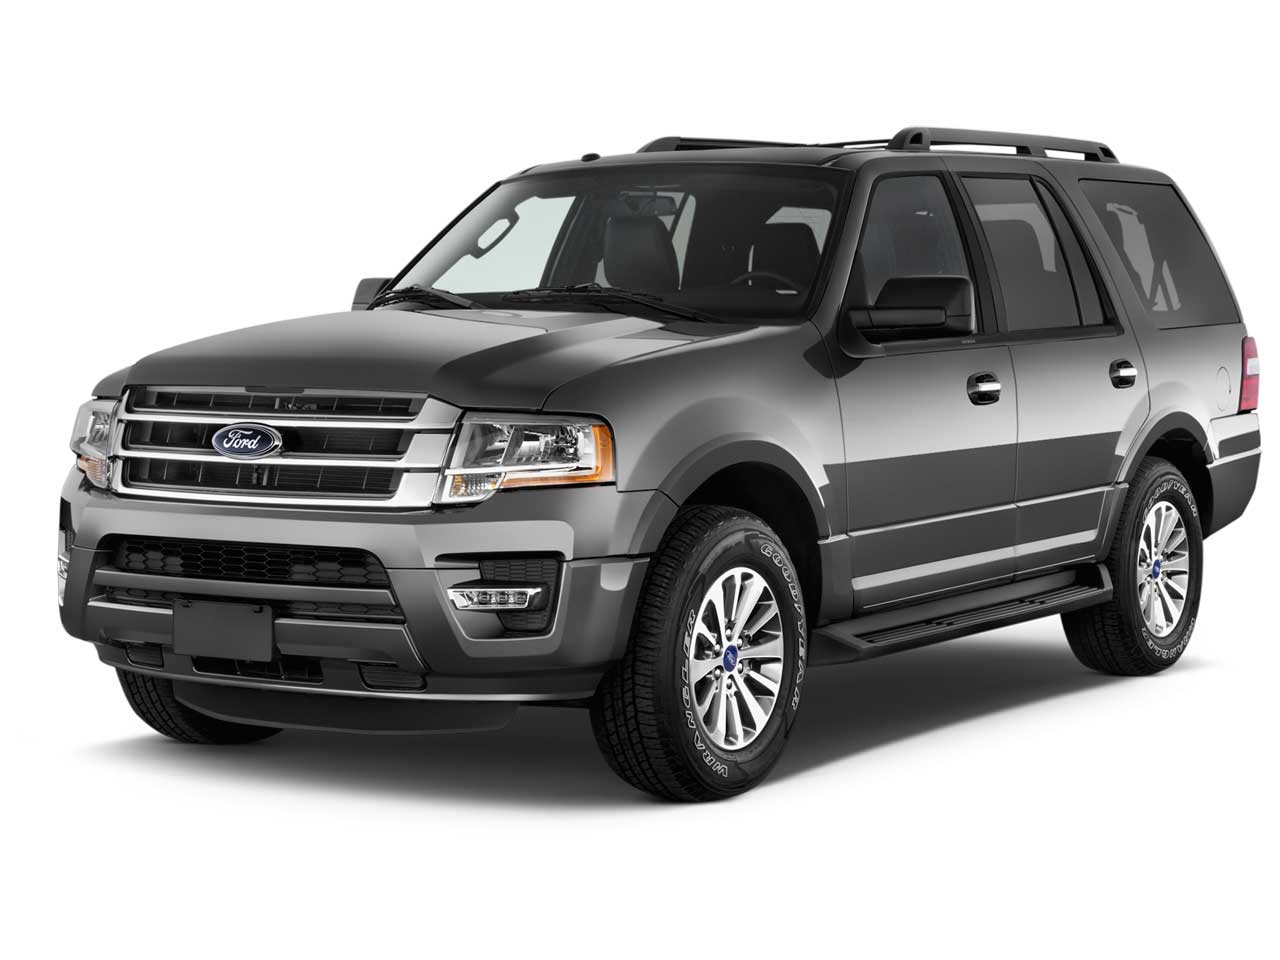 Ford Expedition XLT Exterior front cross view